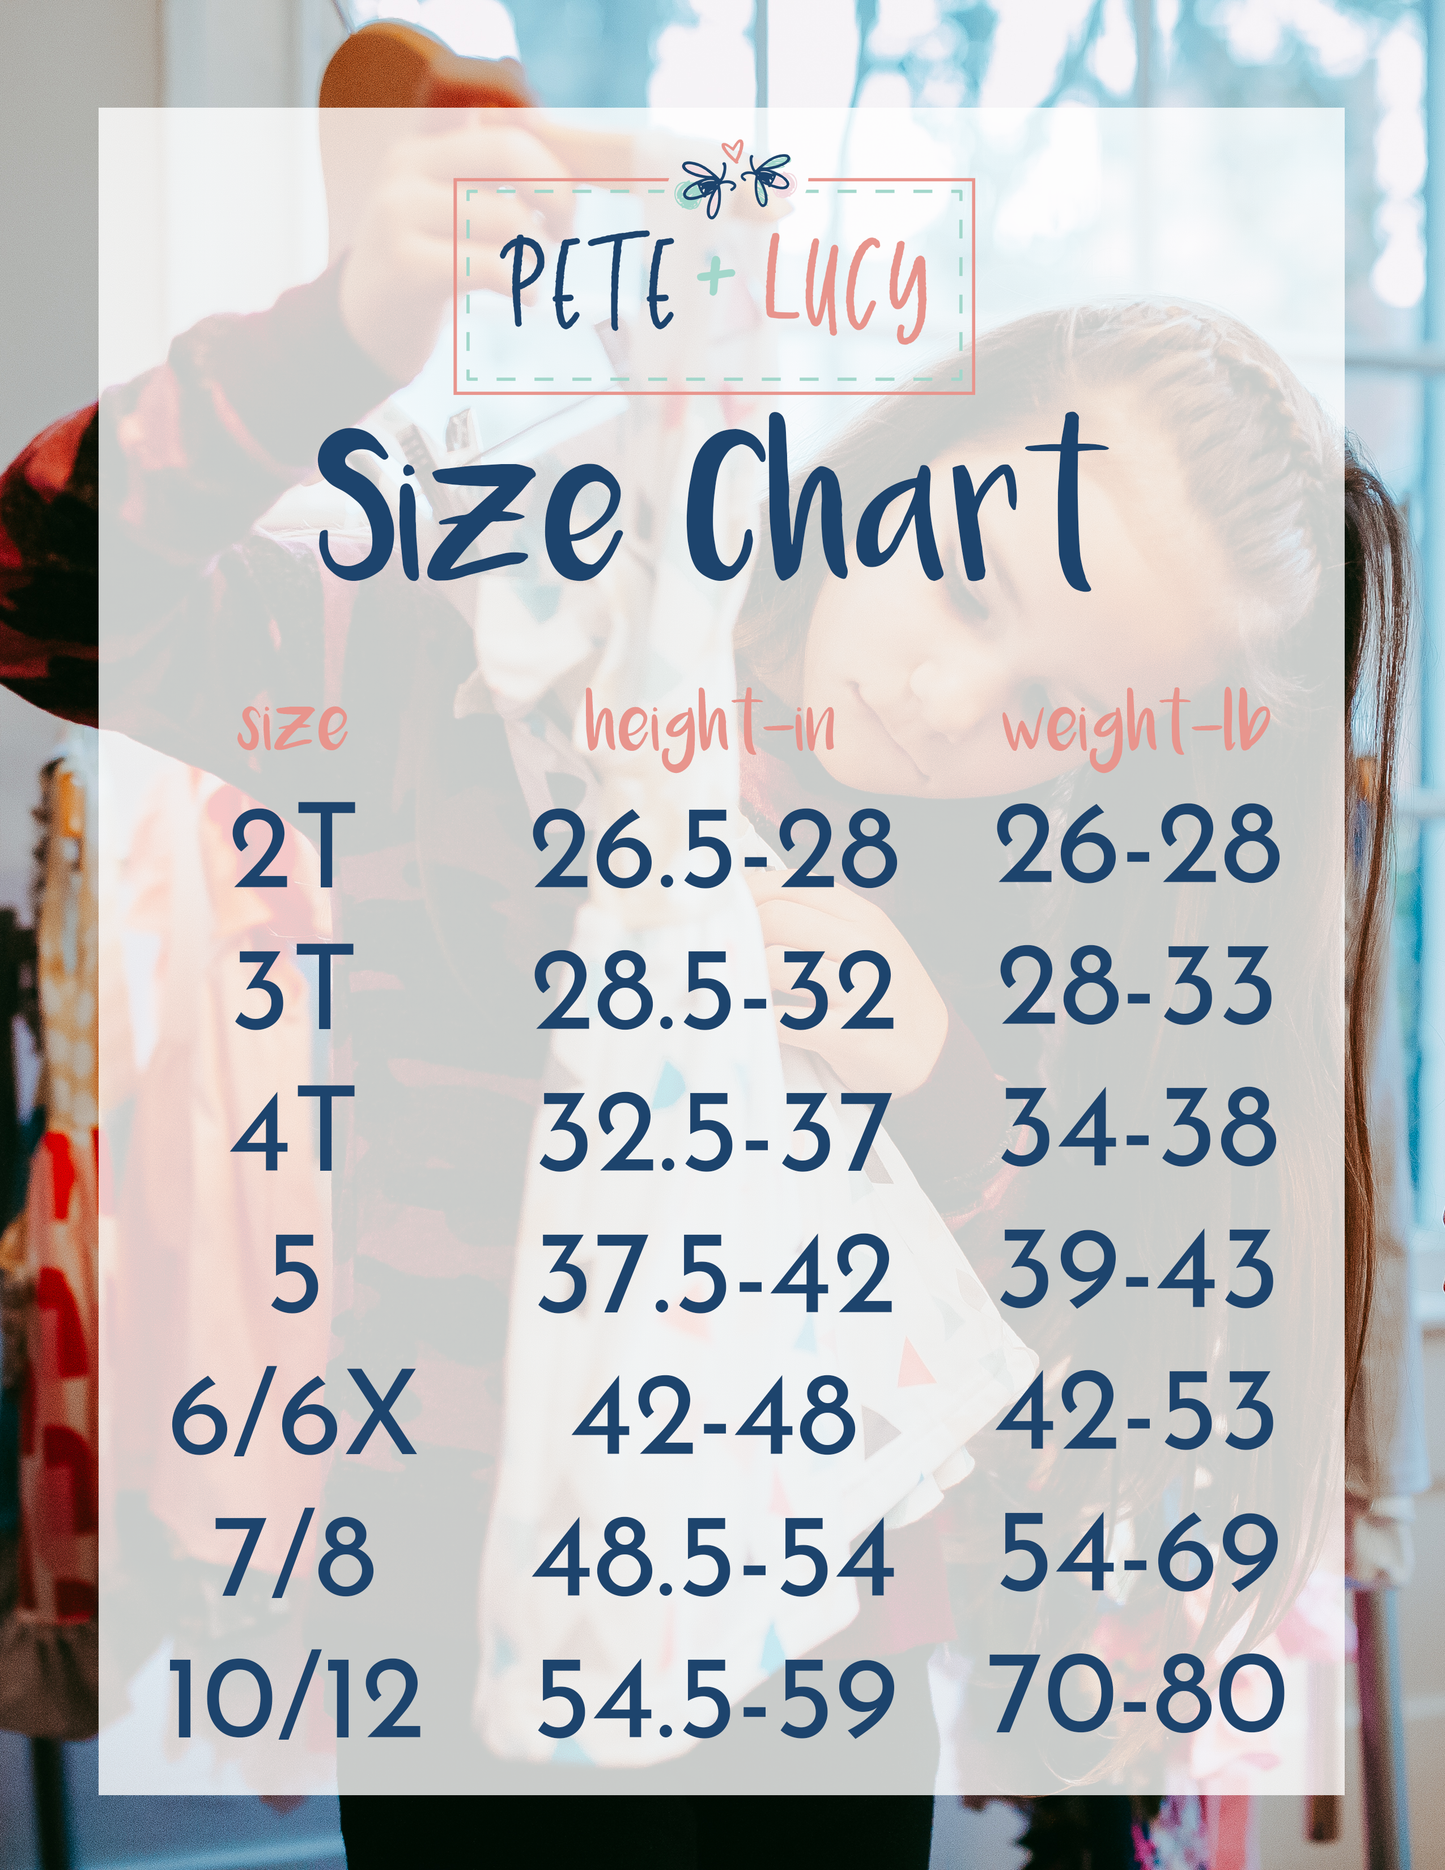 (Preorder) Dream Spell Dress by Pete + Lucy